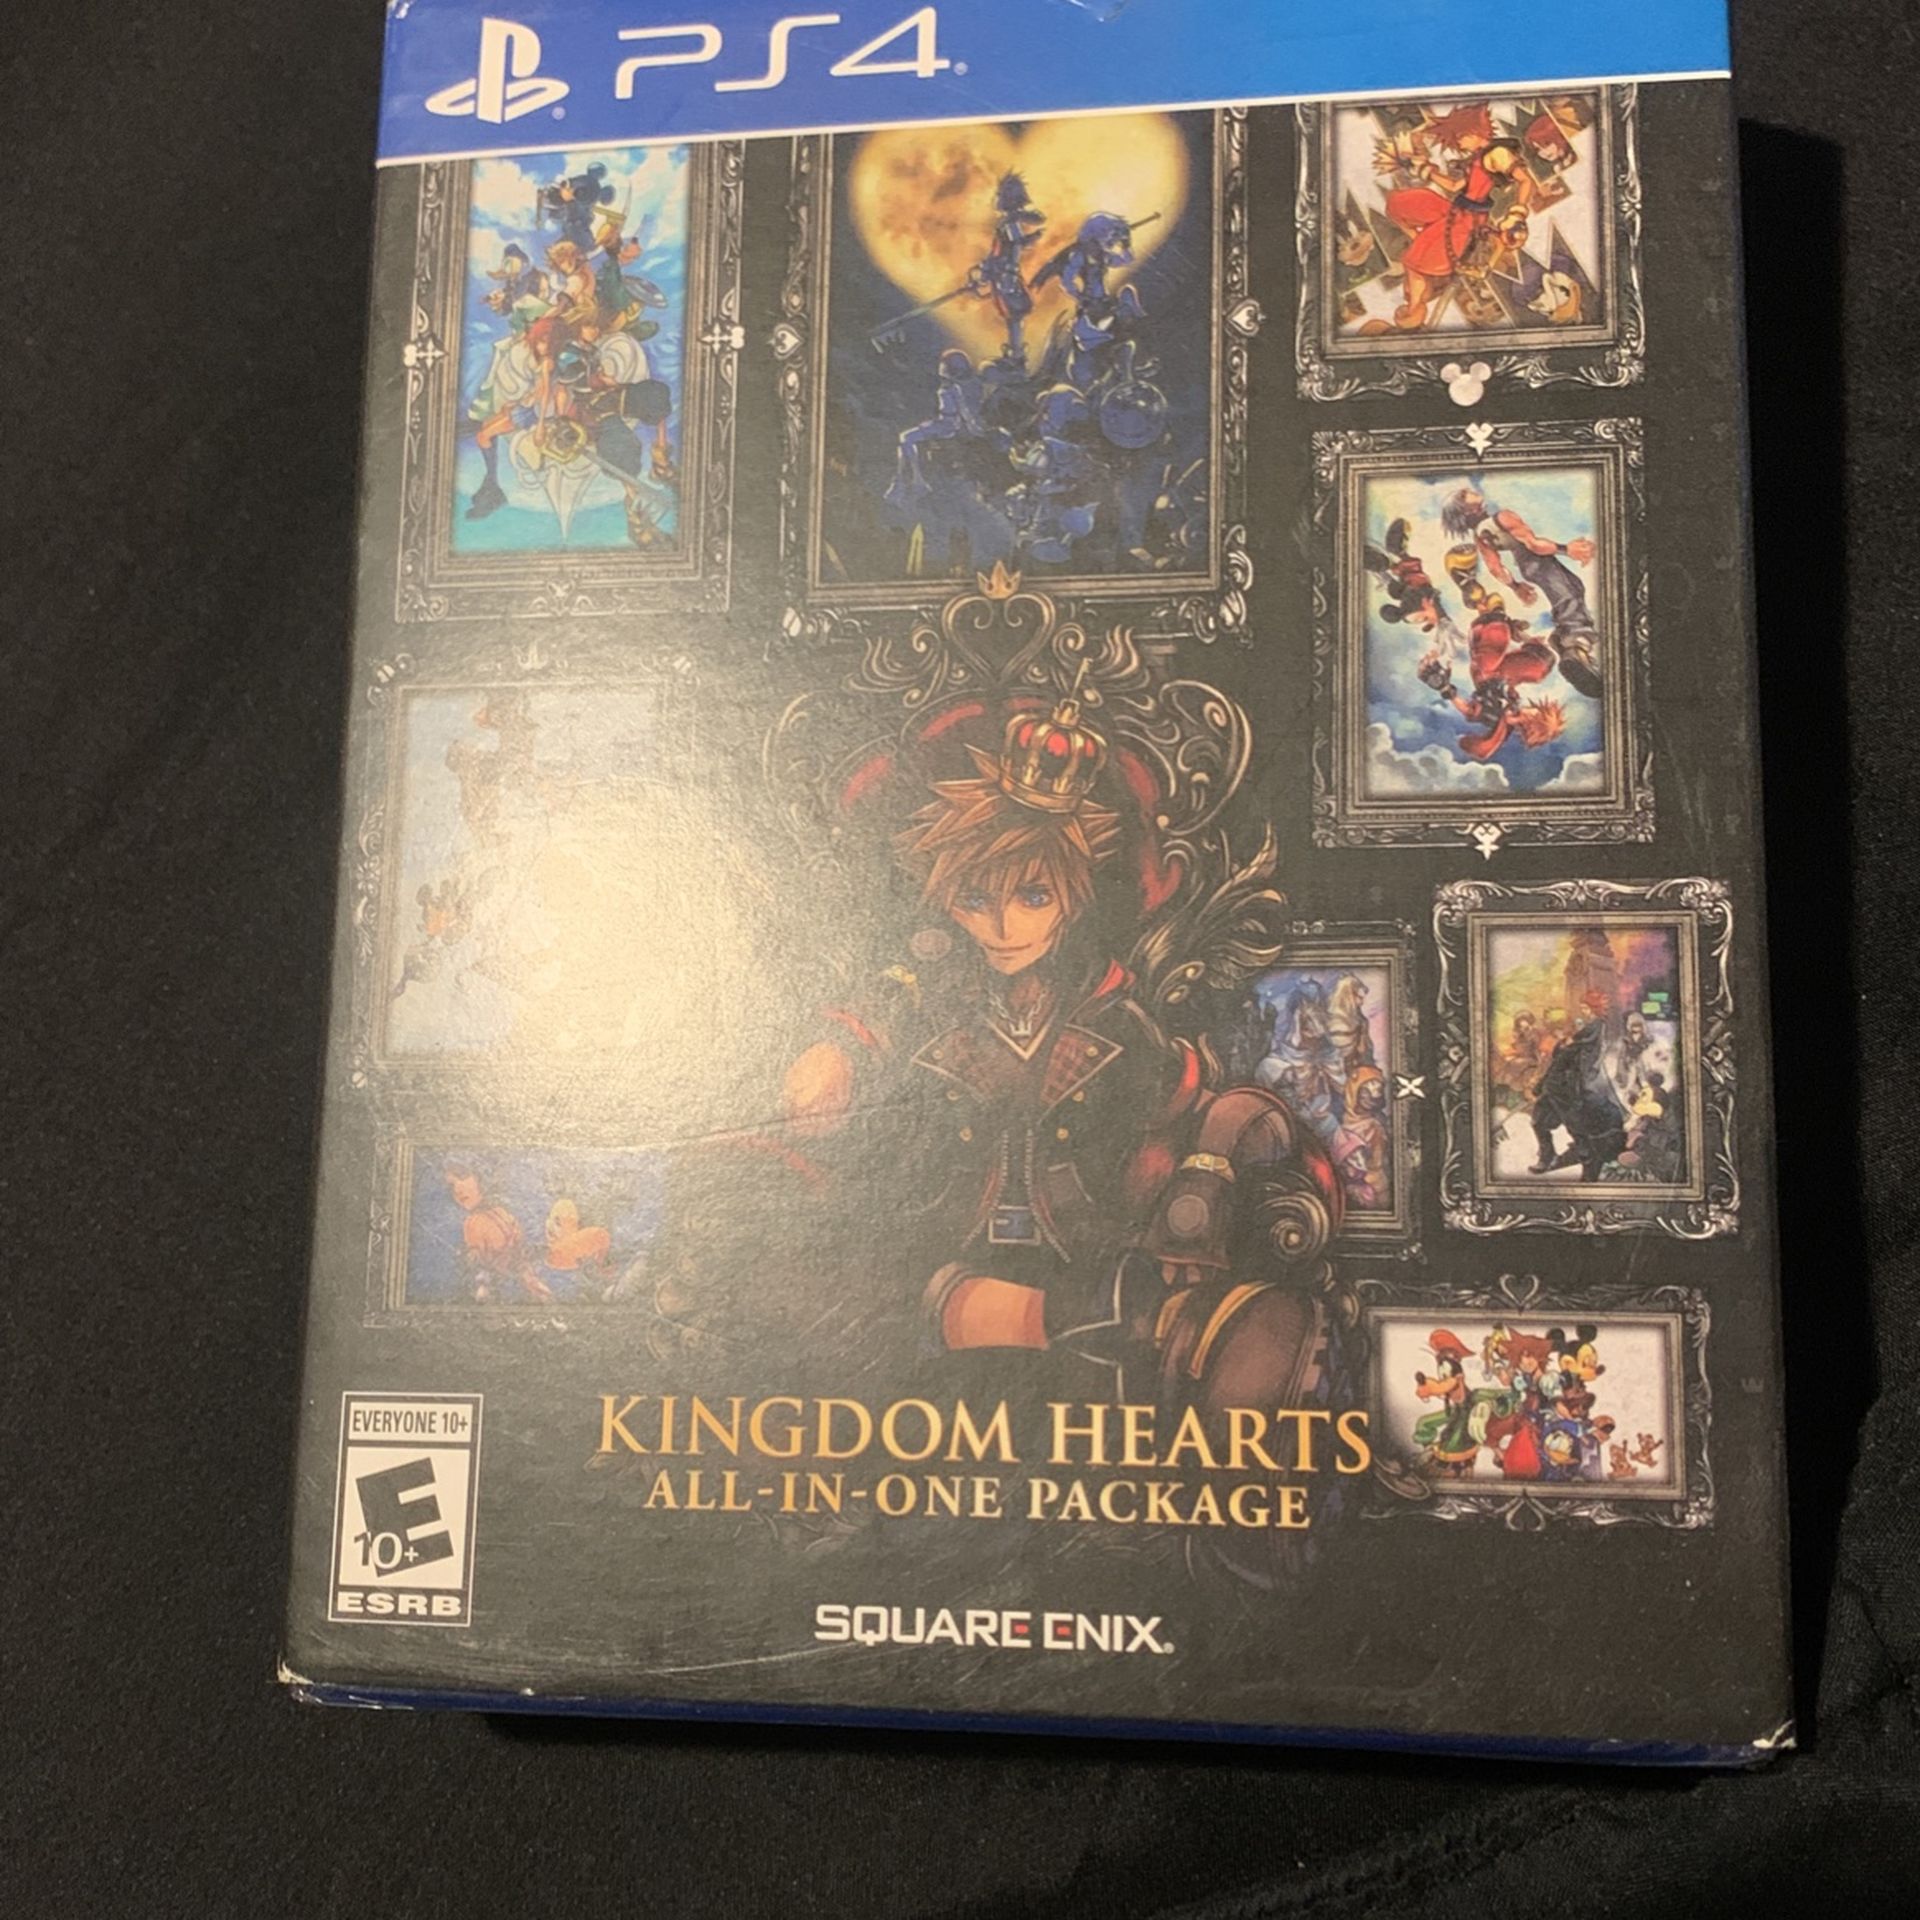 Kingdom Hearts All-in-one Ps4